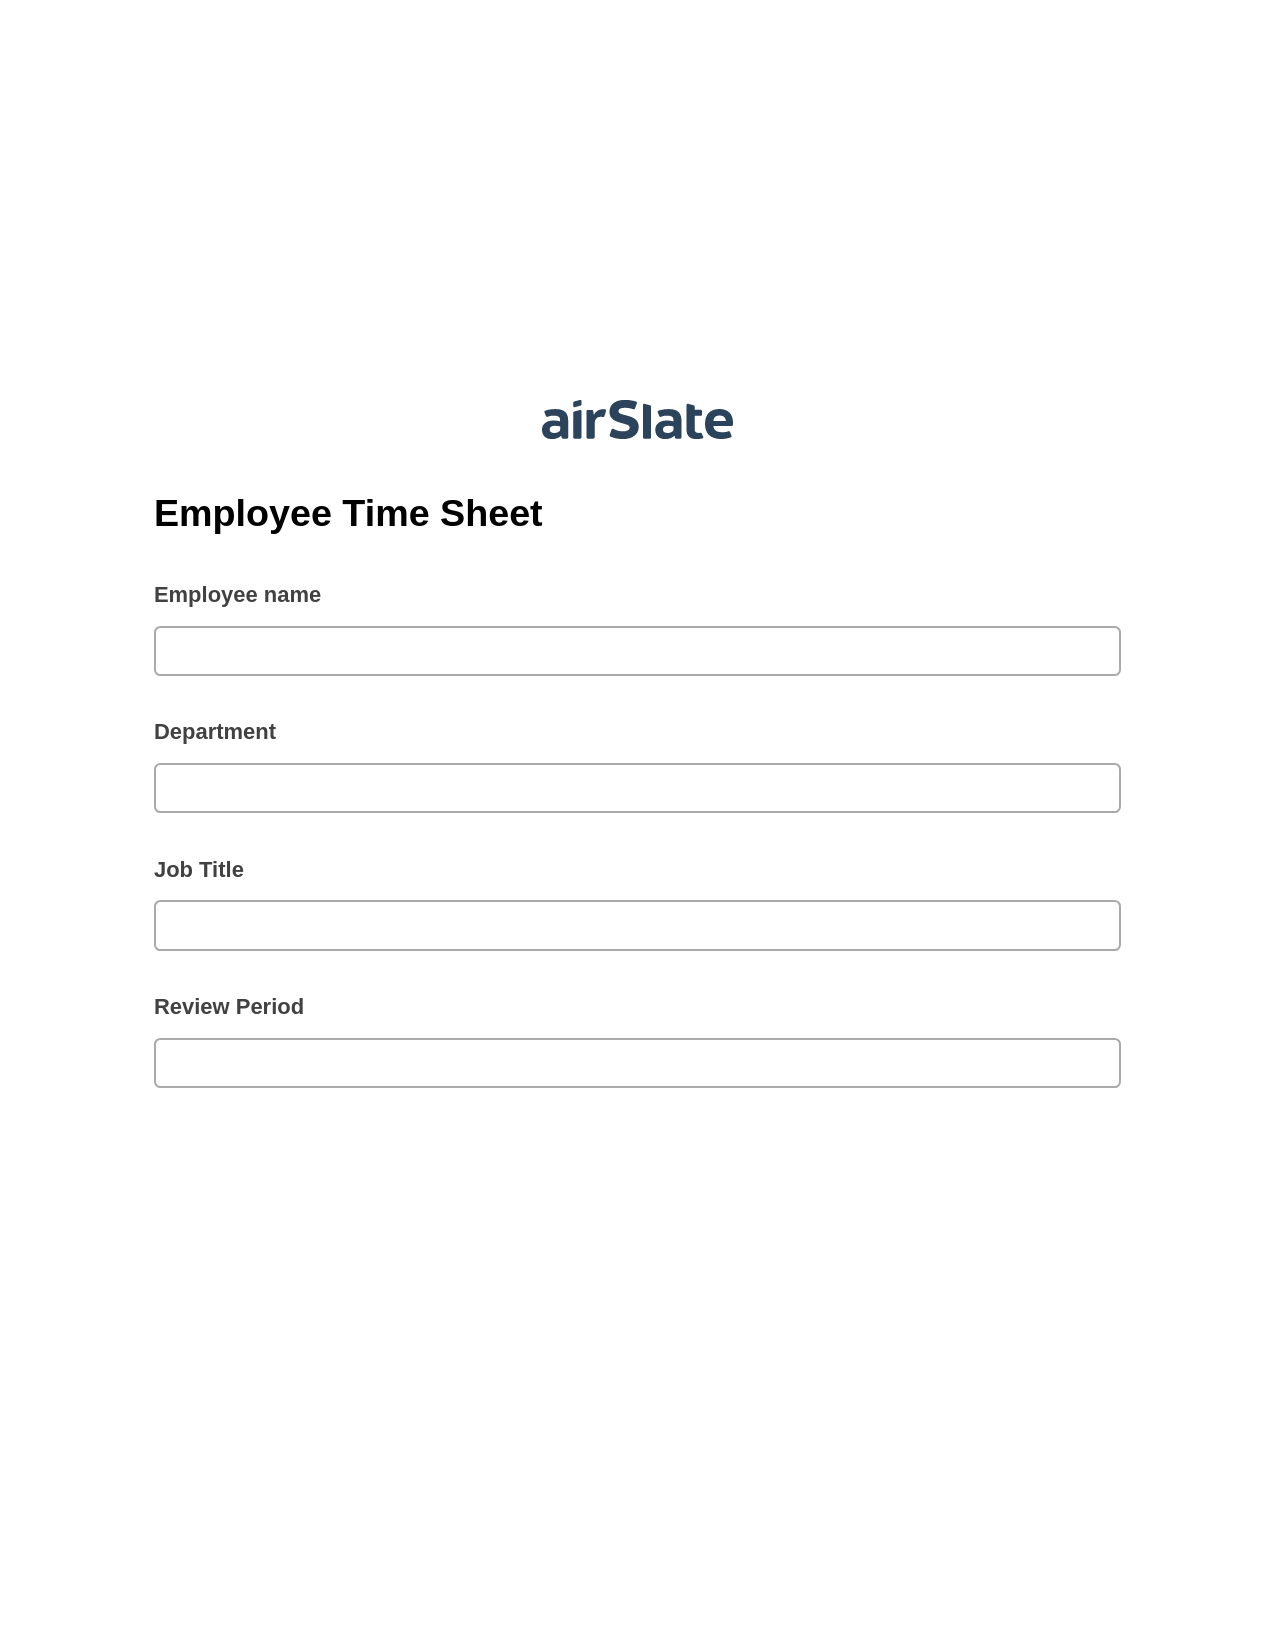 Employee Time Sheet Pre-fill Dropdowns from Airtable, Update Audit Trail Bot, Post-finish Document Bot